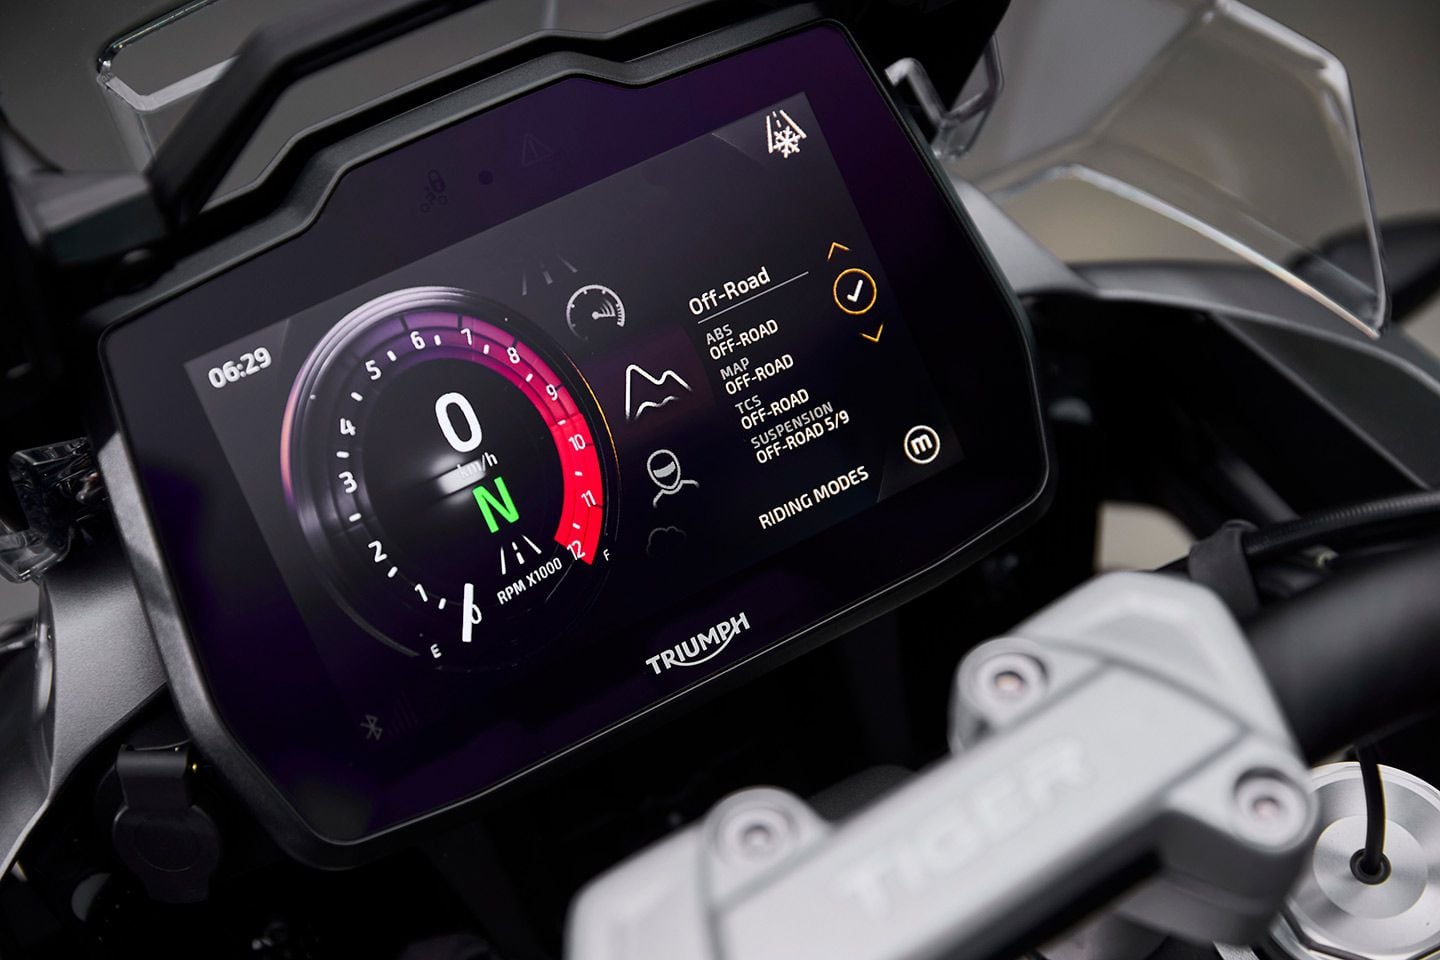 The Tiger 1200 uses a six-axis IMU to manage cornering ABS and traction control. The GT models have five ride modes (Rain, Road, Sport, Rider, and Off-Road); the Rally models add Off-Road Pro which turns off ABS on both the front and rear. Adjusting rider-aid settings on the 7-inch TFT display is relatively intuitive, but arguably less so than on the previous generation (2018–2021).